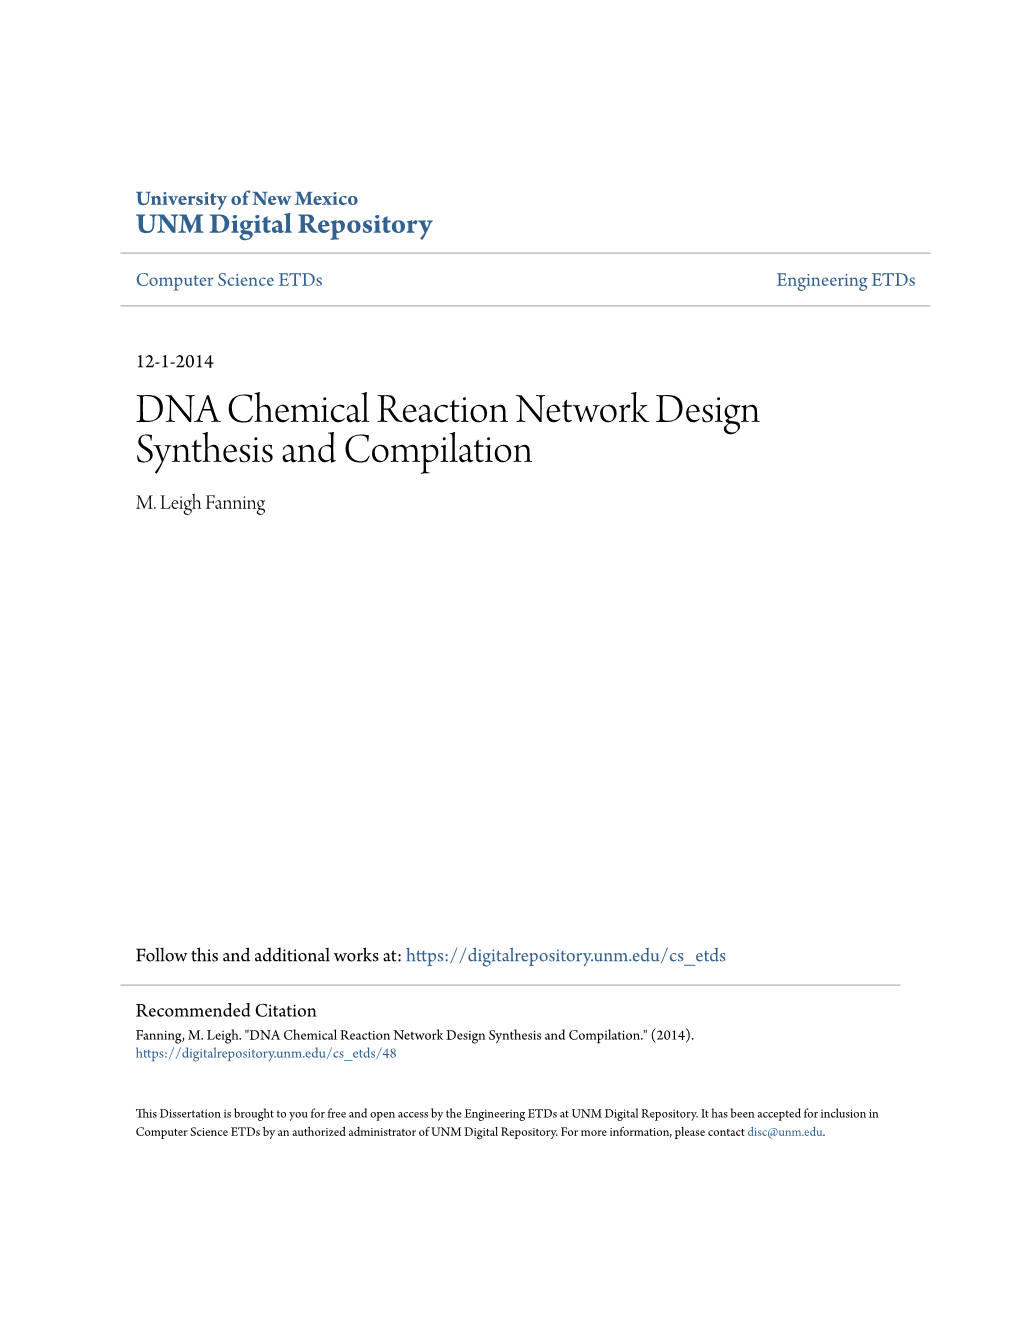 DNA Chemical Reaction Network Design Synthesis and Compilation M